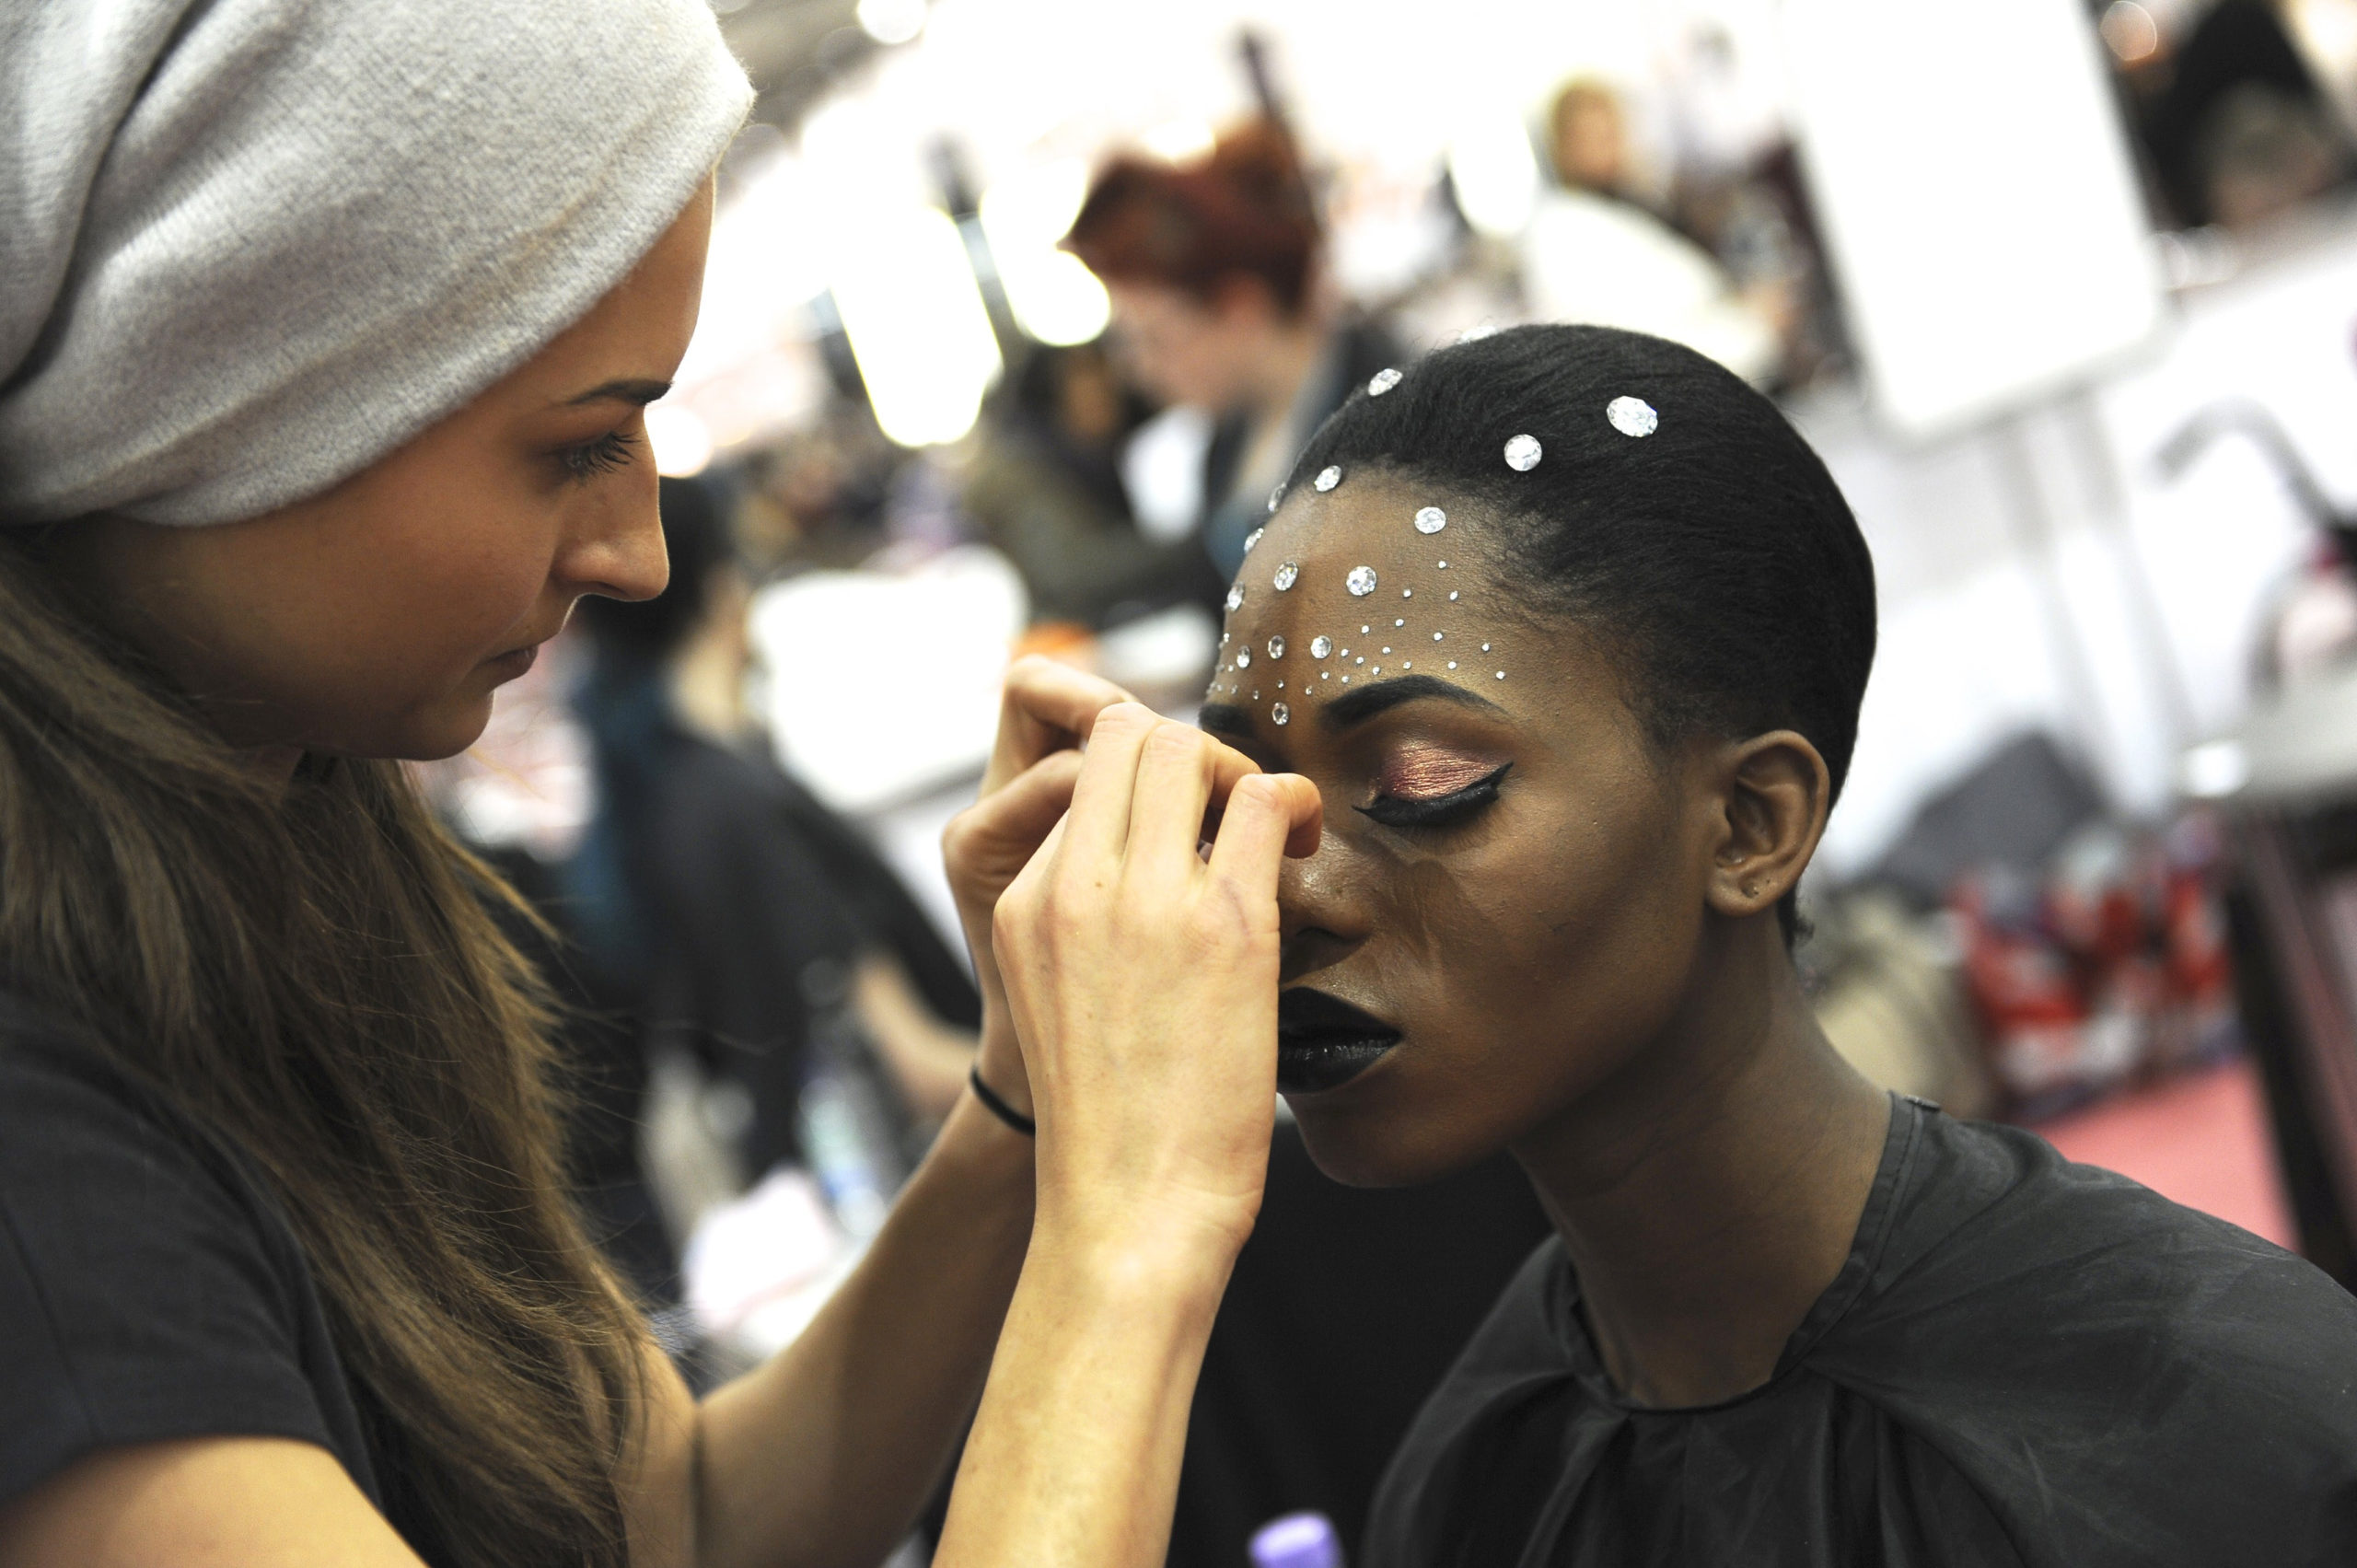 professional beauty london -Make-Up Competitions